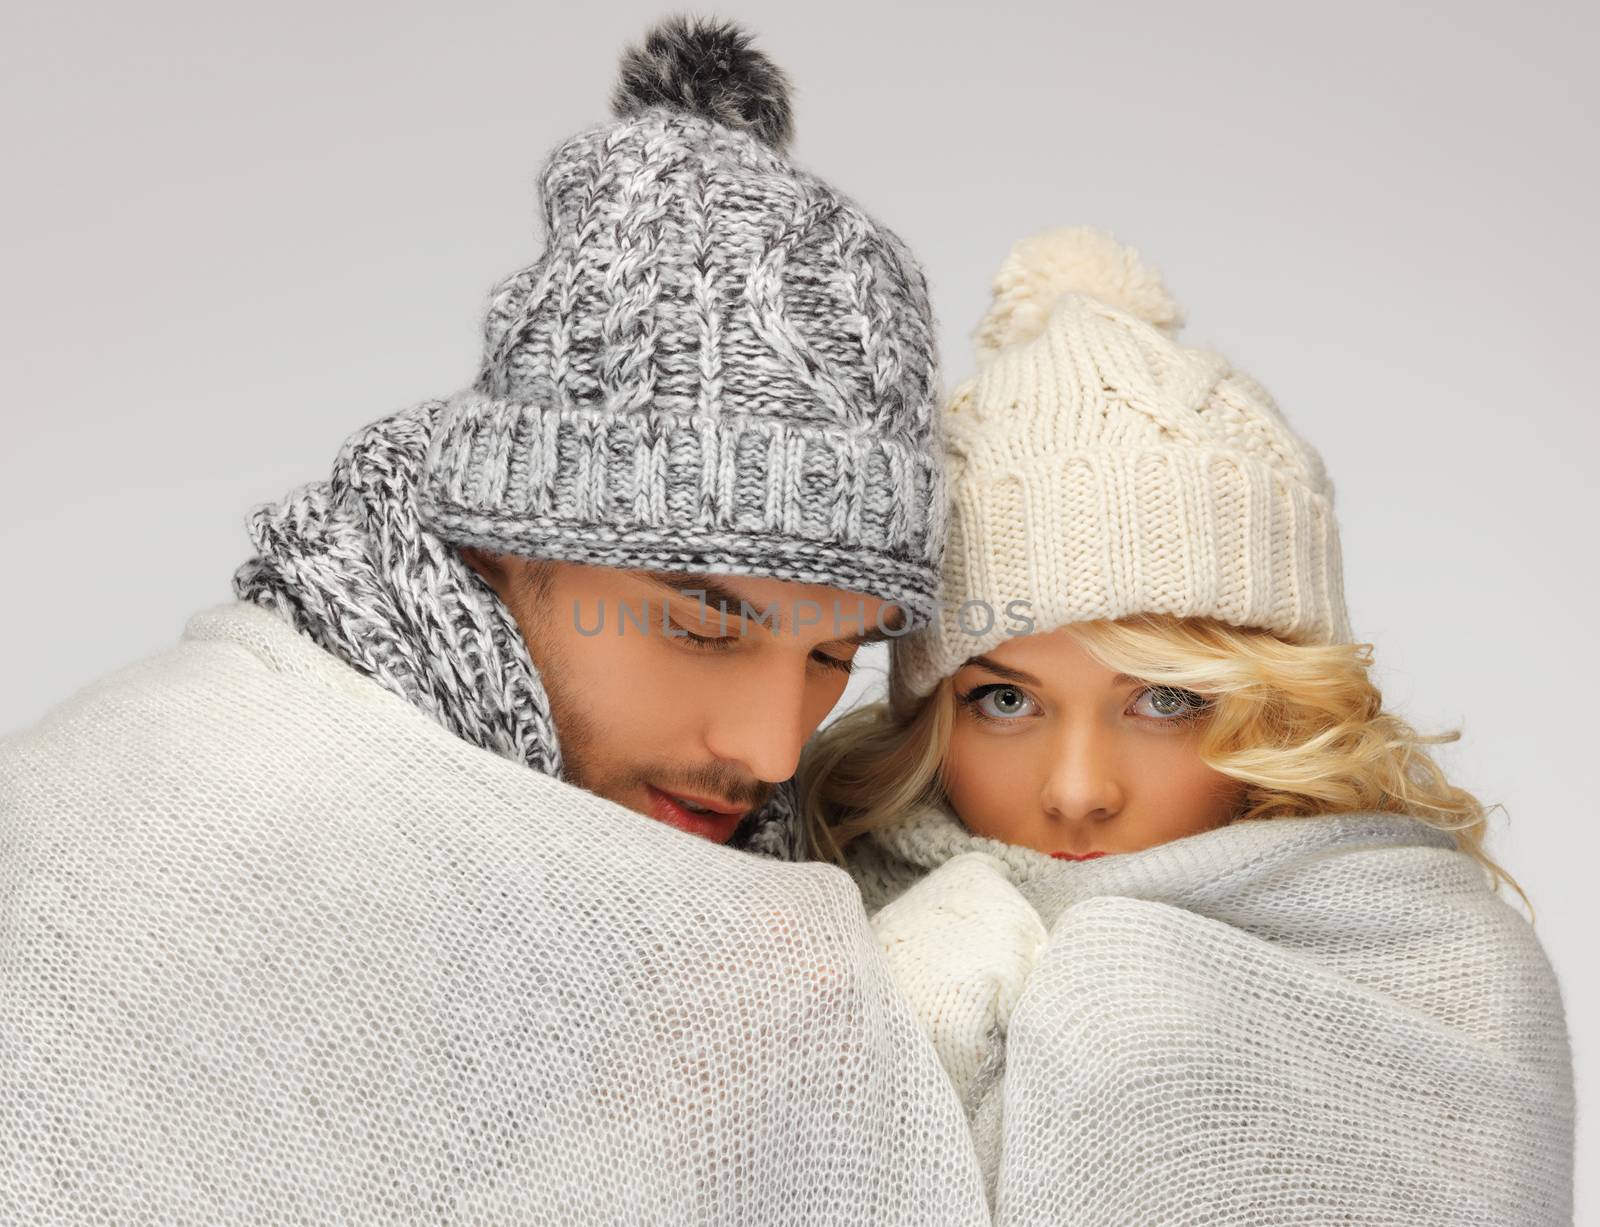 bright picture of family couple under warm blanket